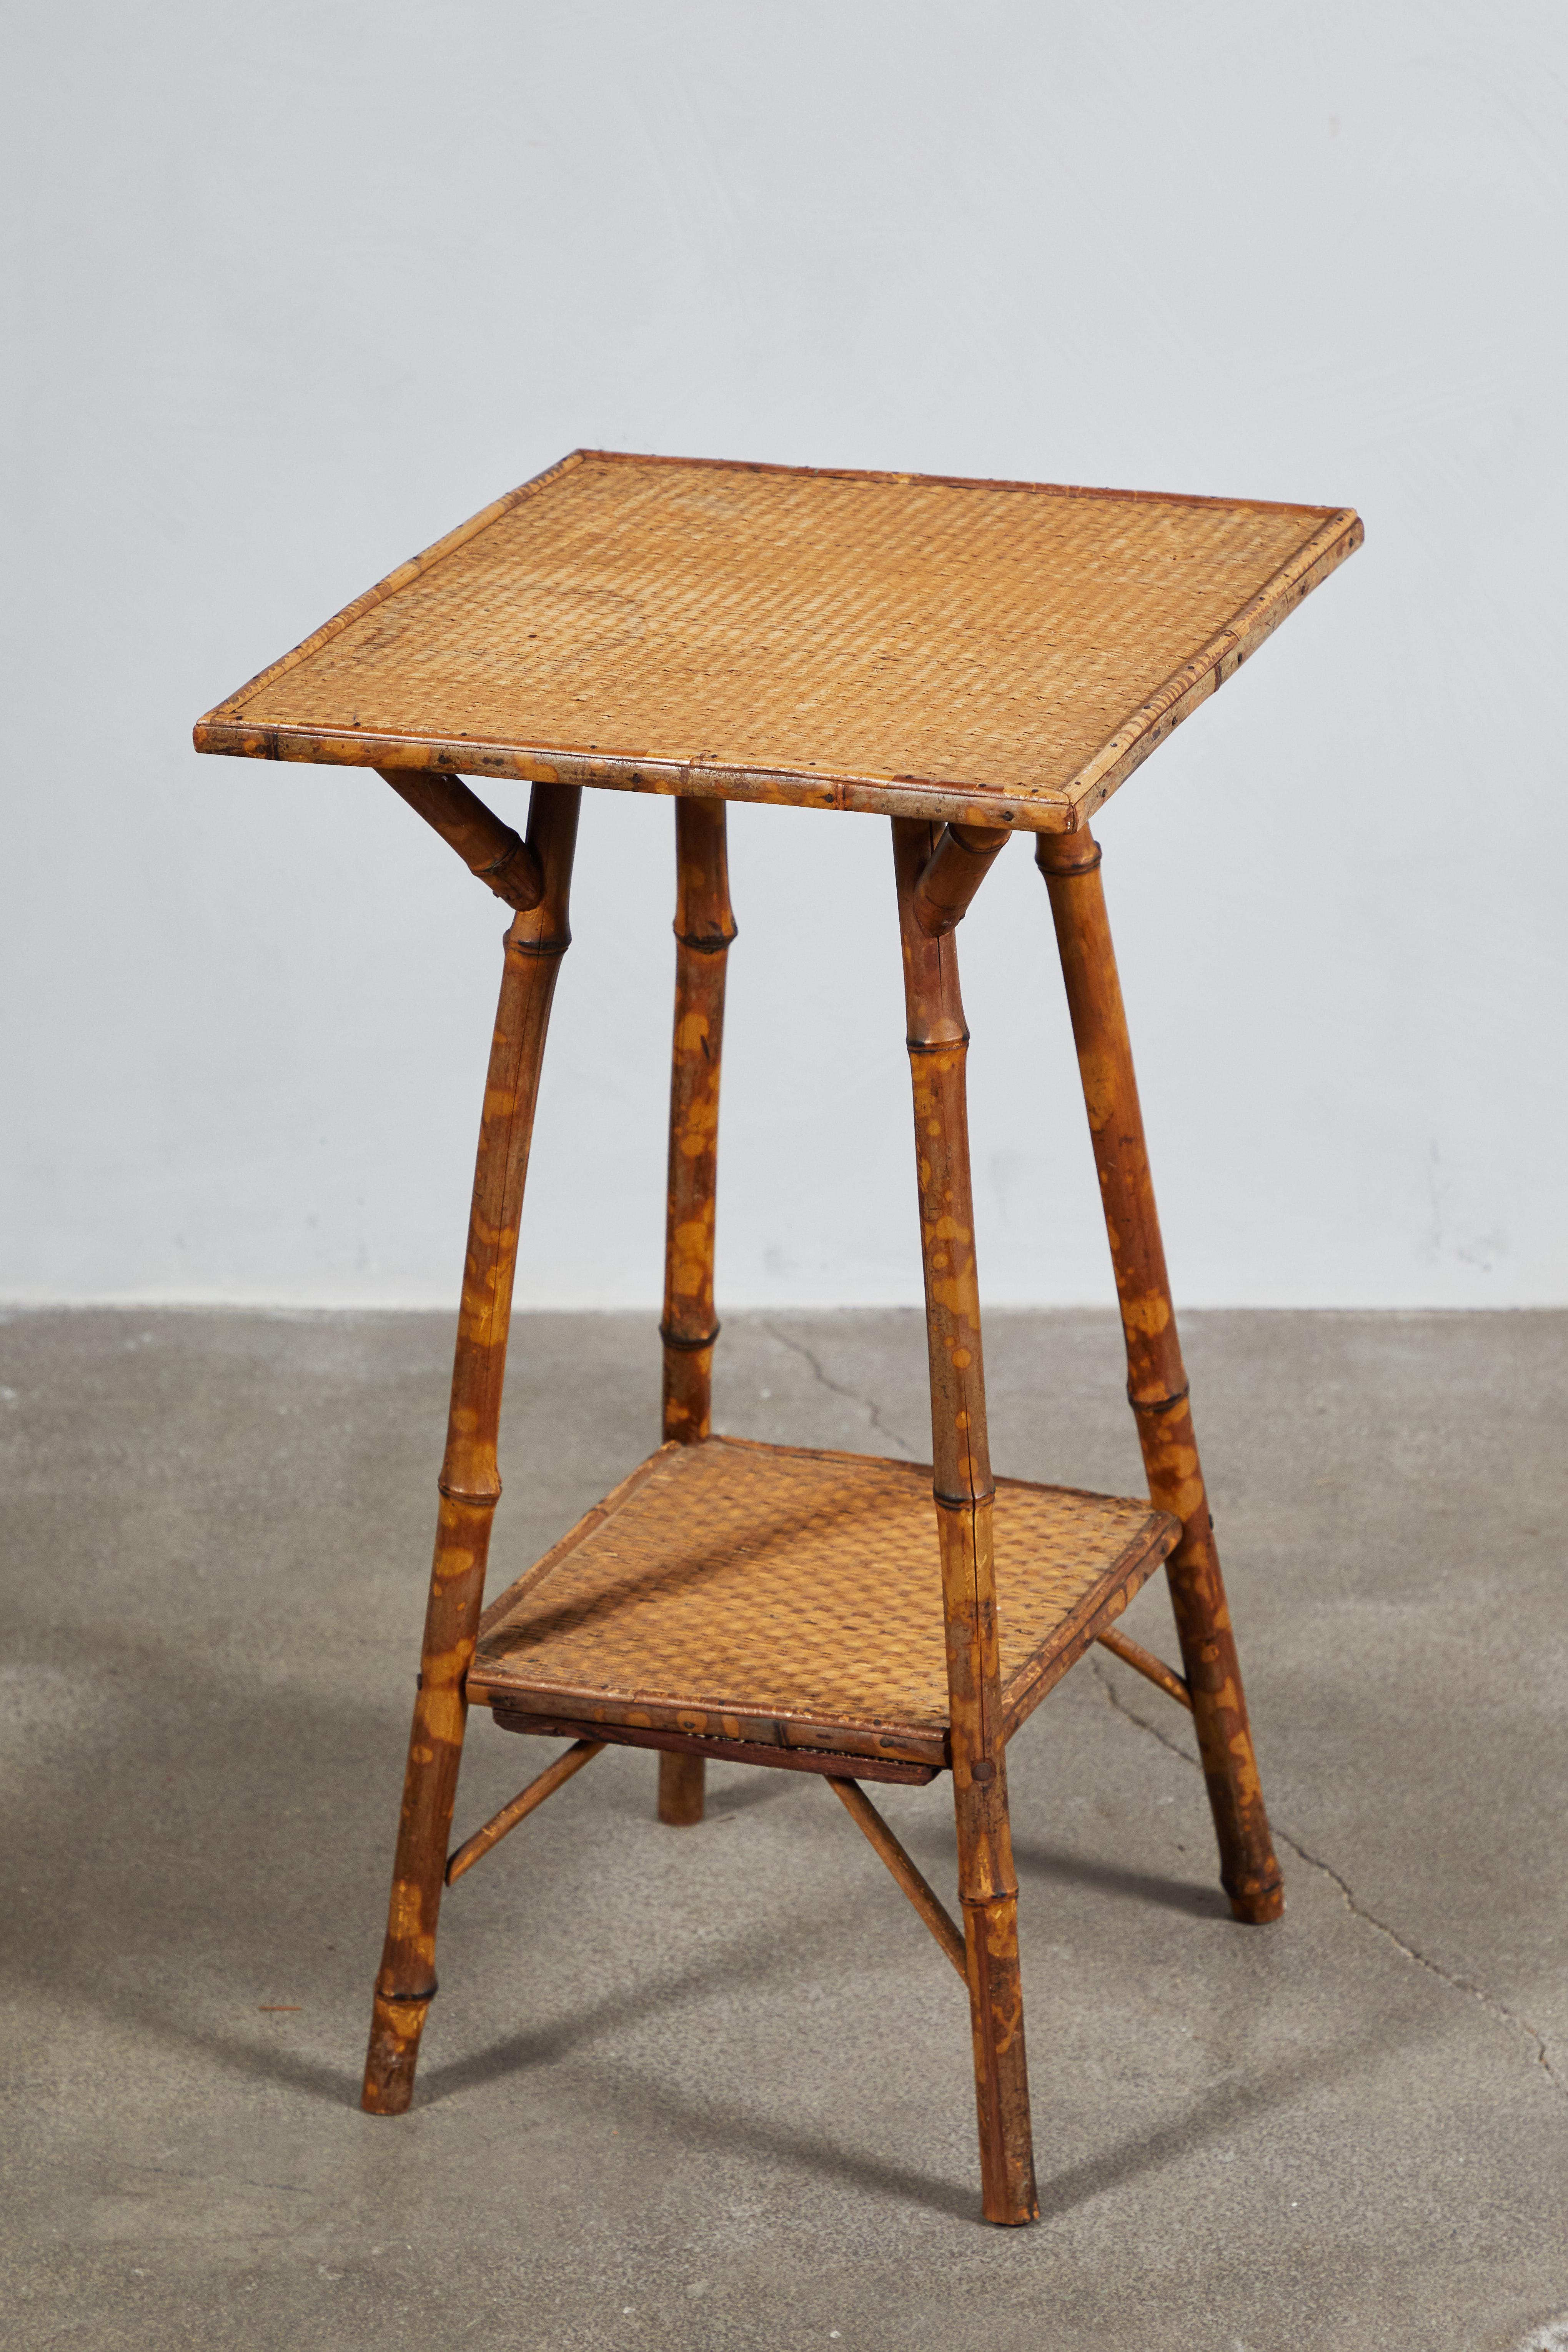 Two-tiered bamboo side table.